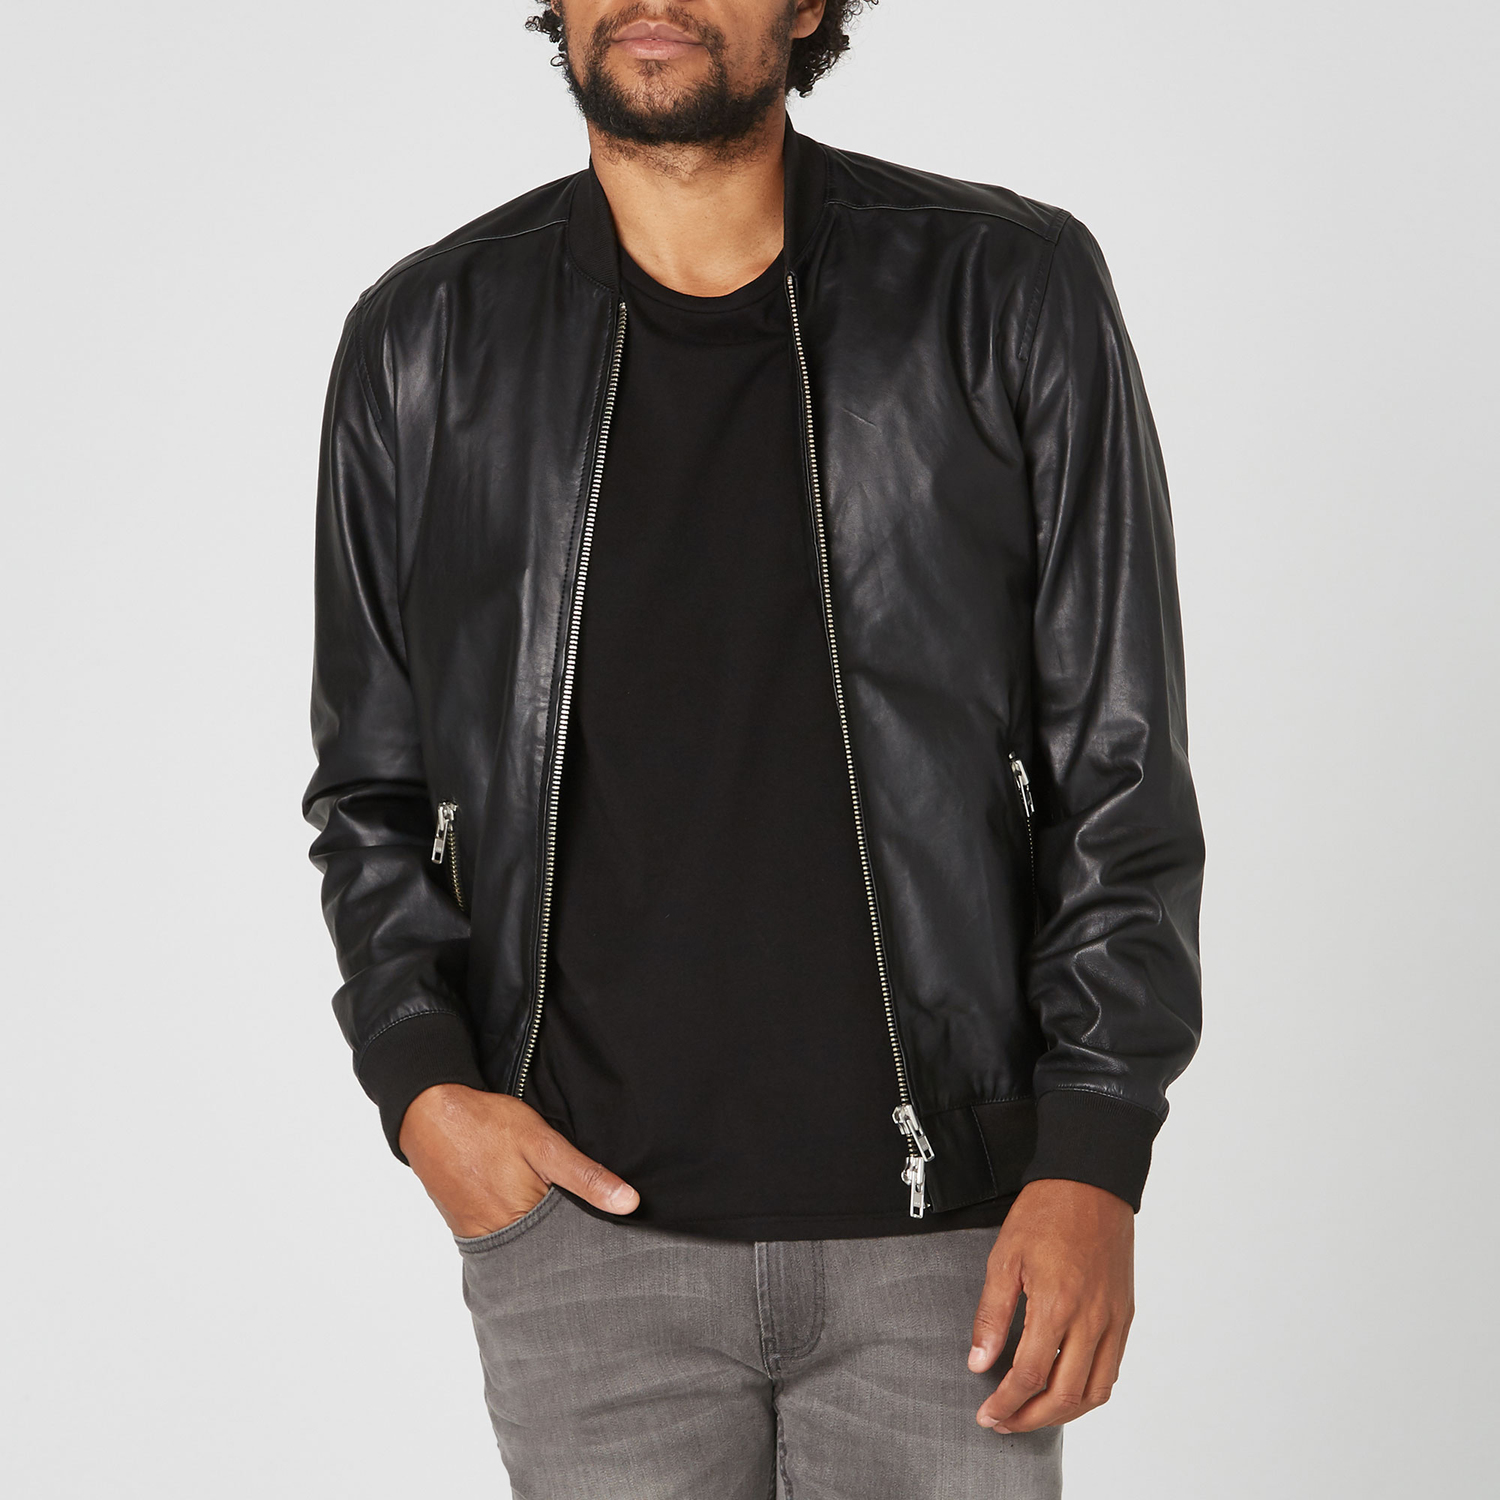 Leather bomber jackets – loved for decades